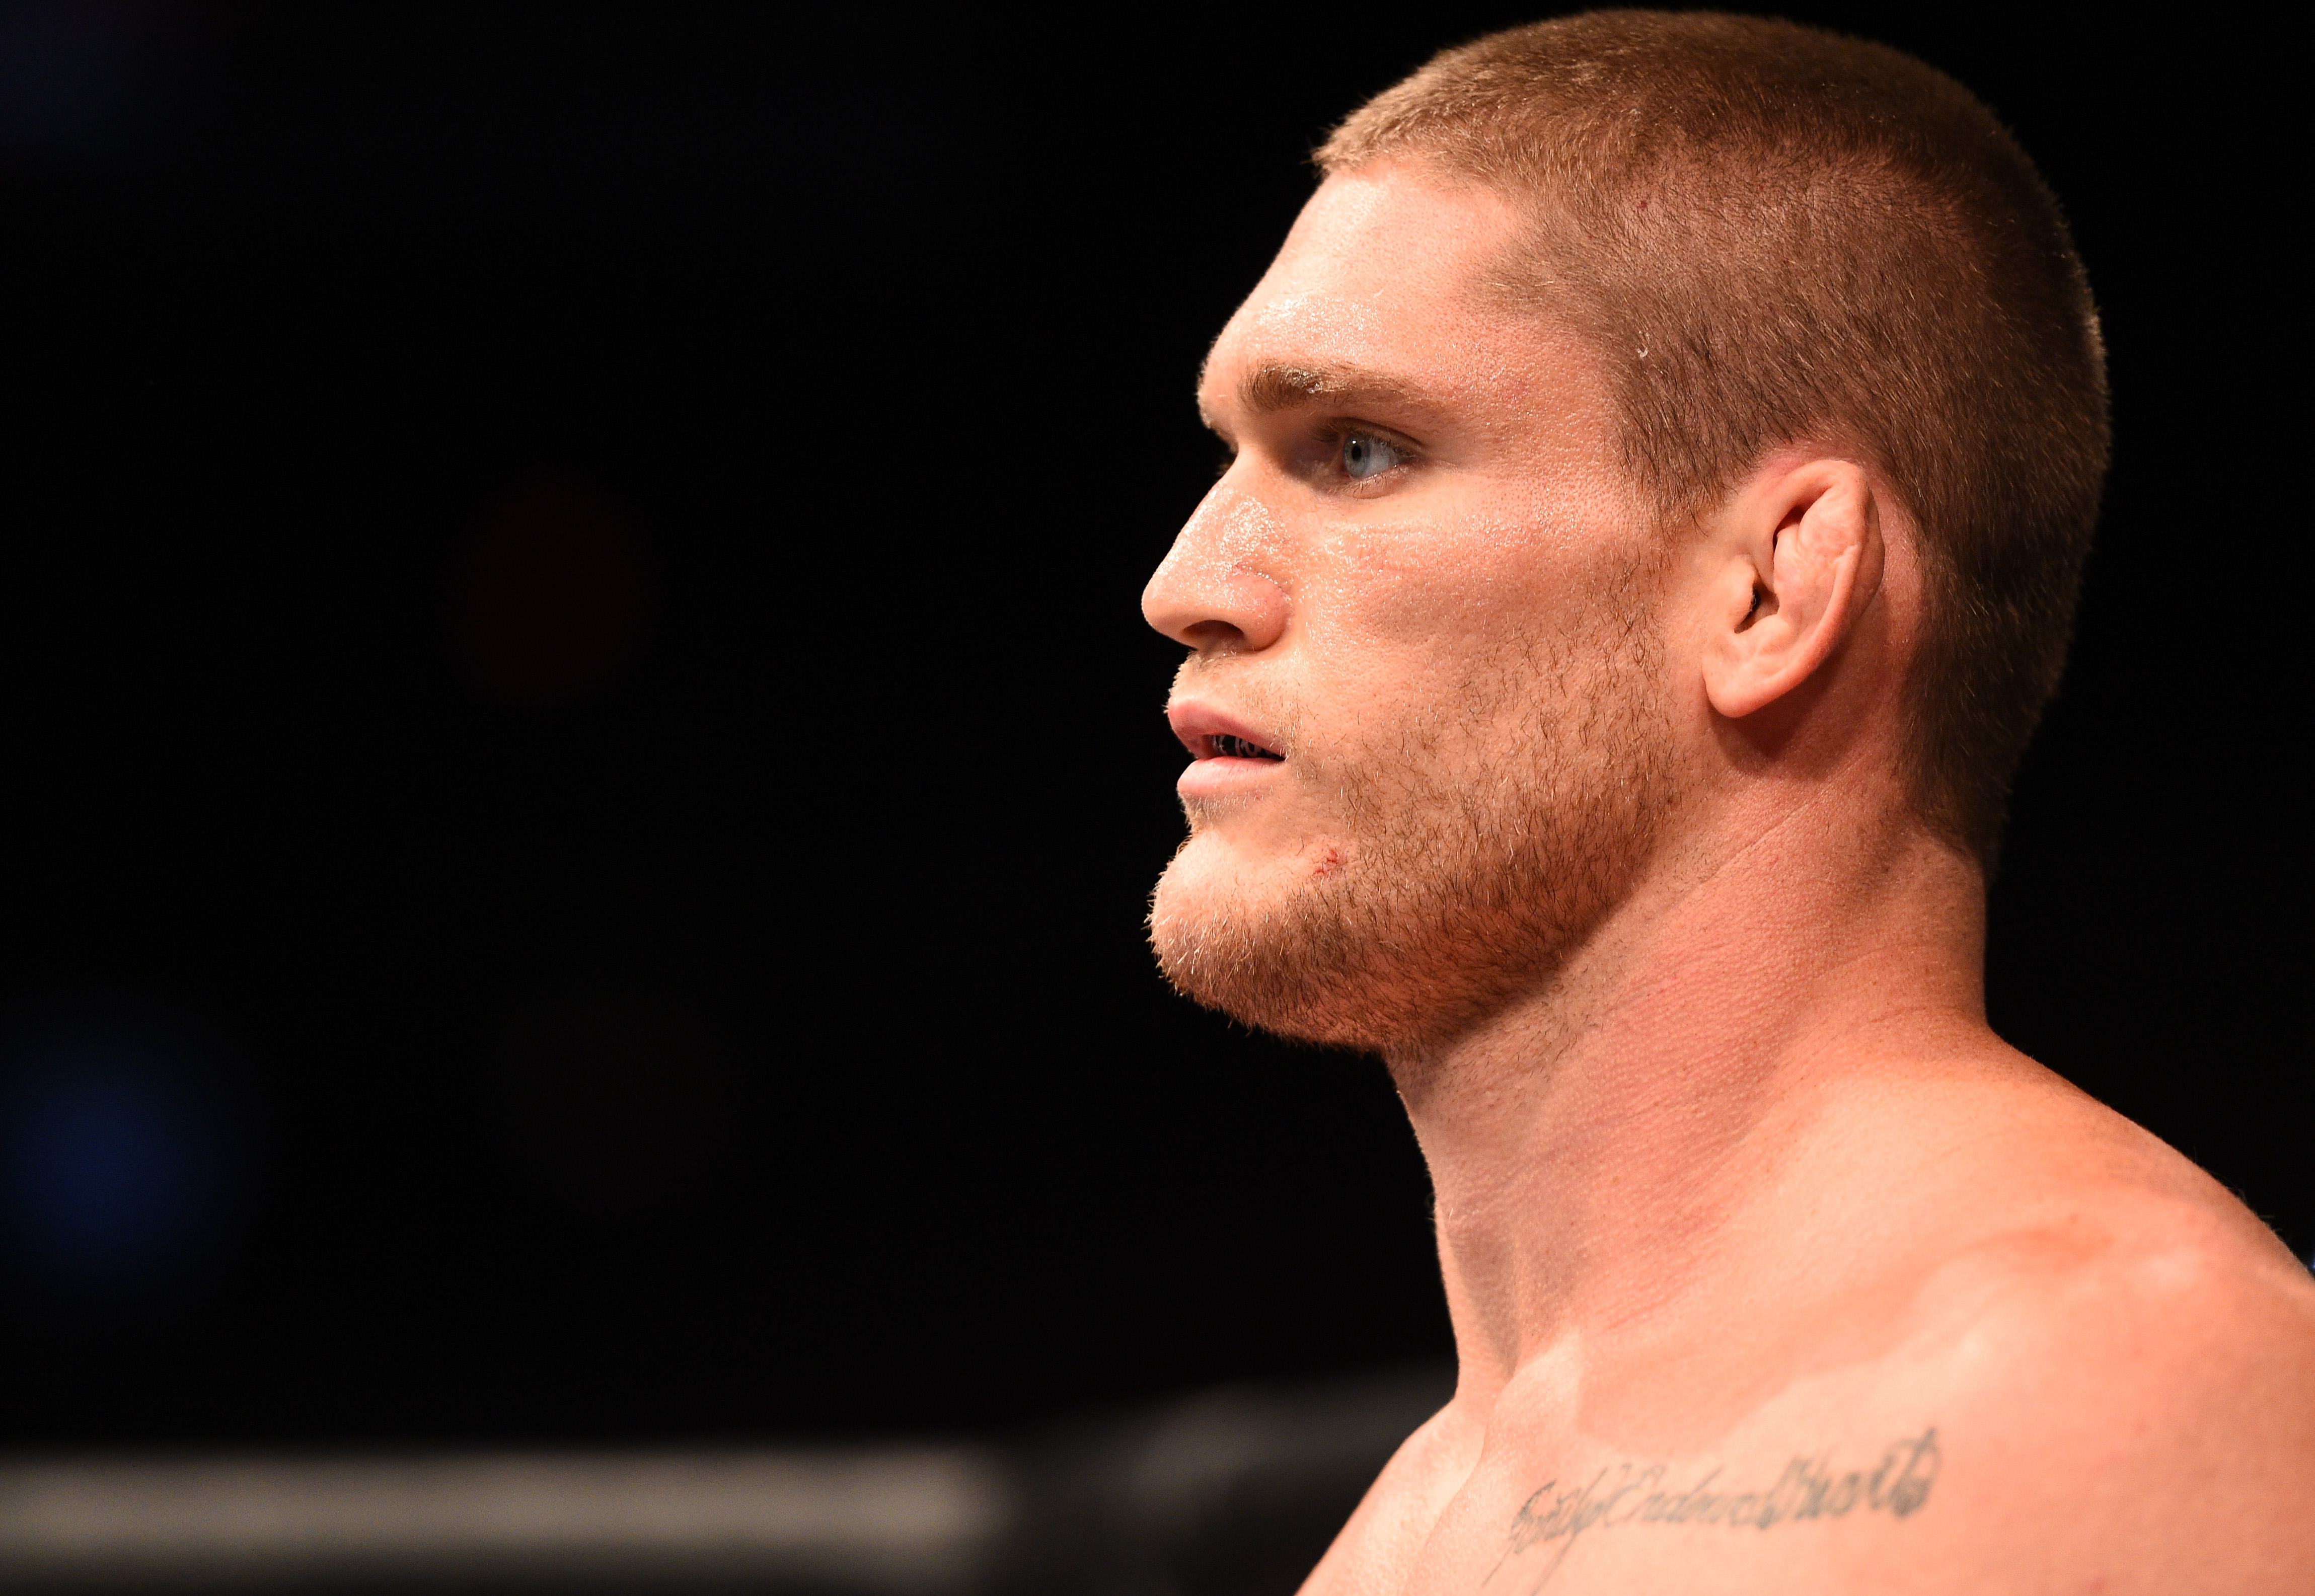 Todd Duffee awaits the start of his bout against Frank Mir in 2015.